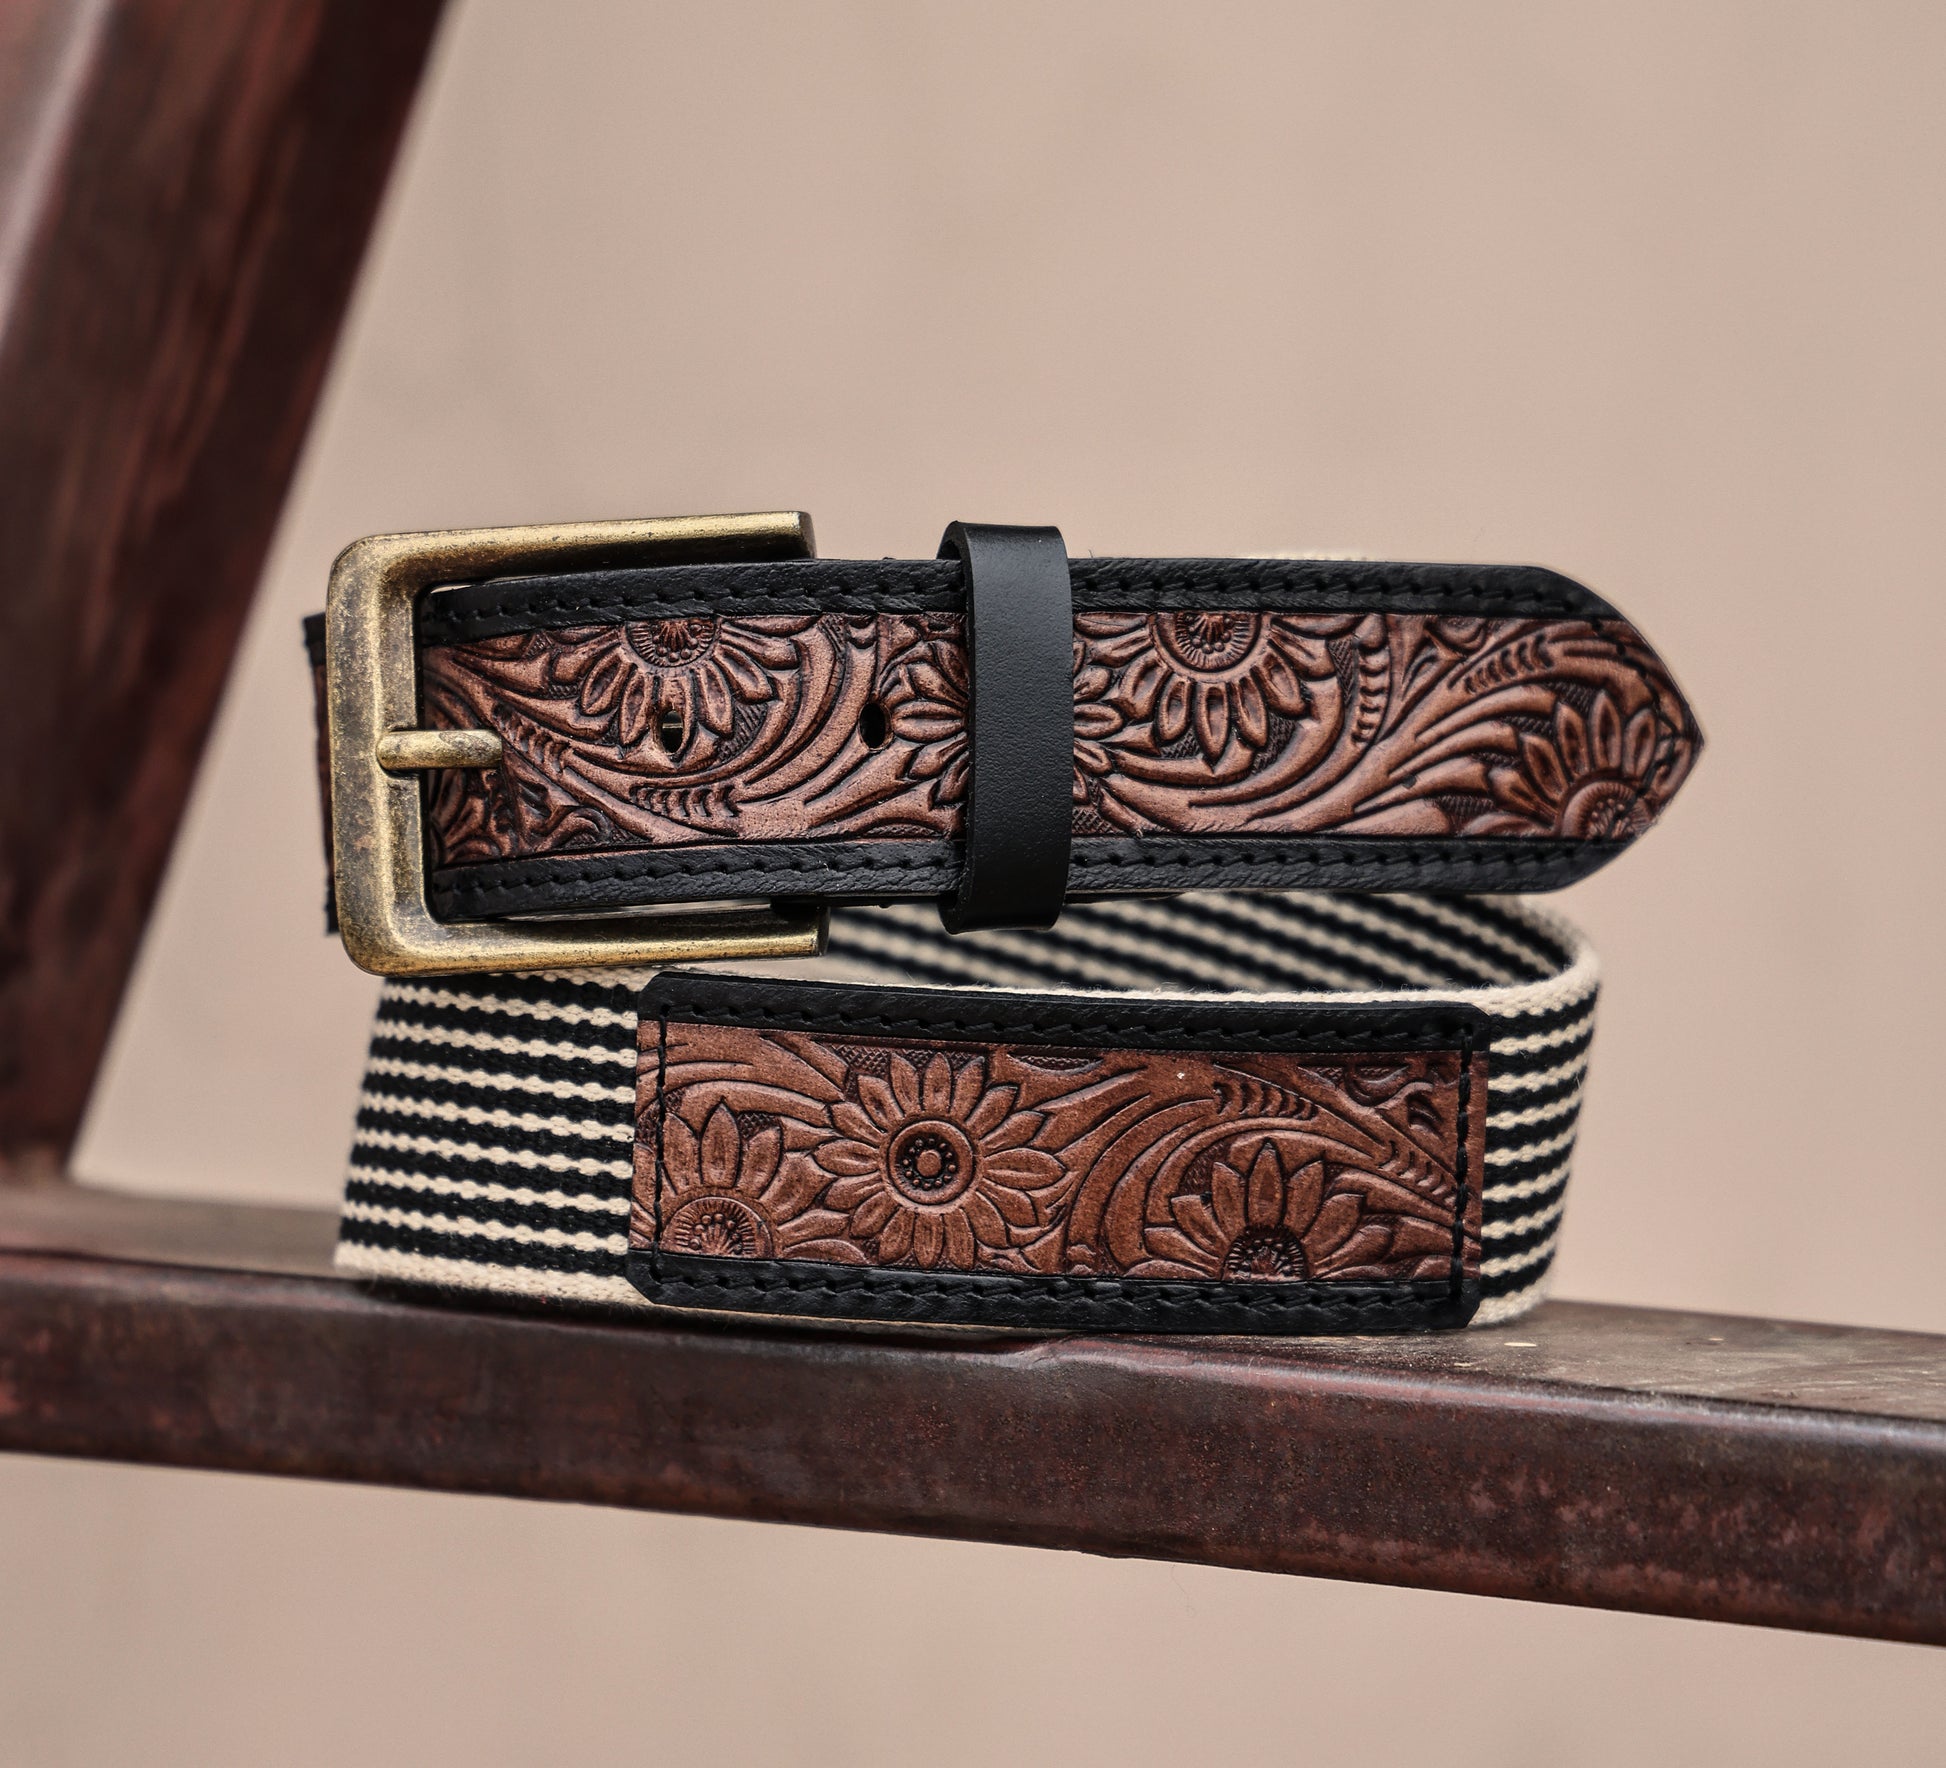 Artisan Elegance: Leather Hand-Tooled and Webbing Belt – A Perfect Blend of Tradition and Modern Style. - CELTICINDIA